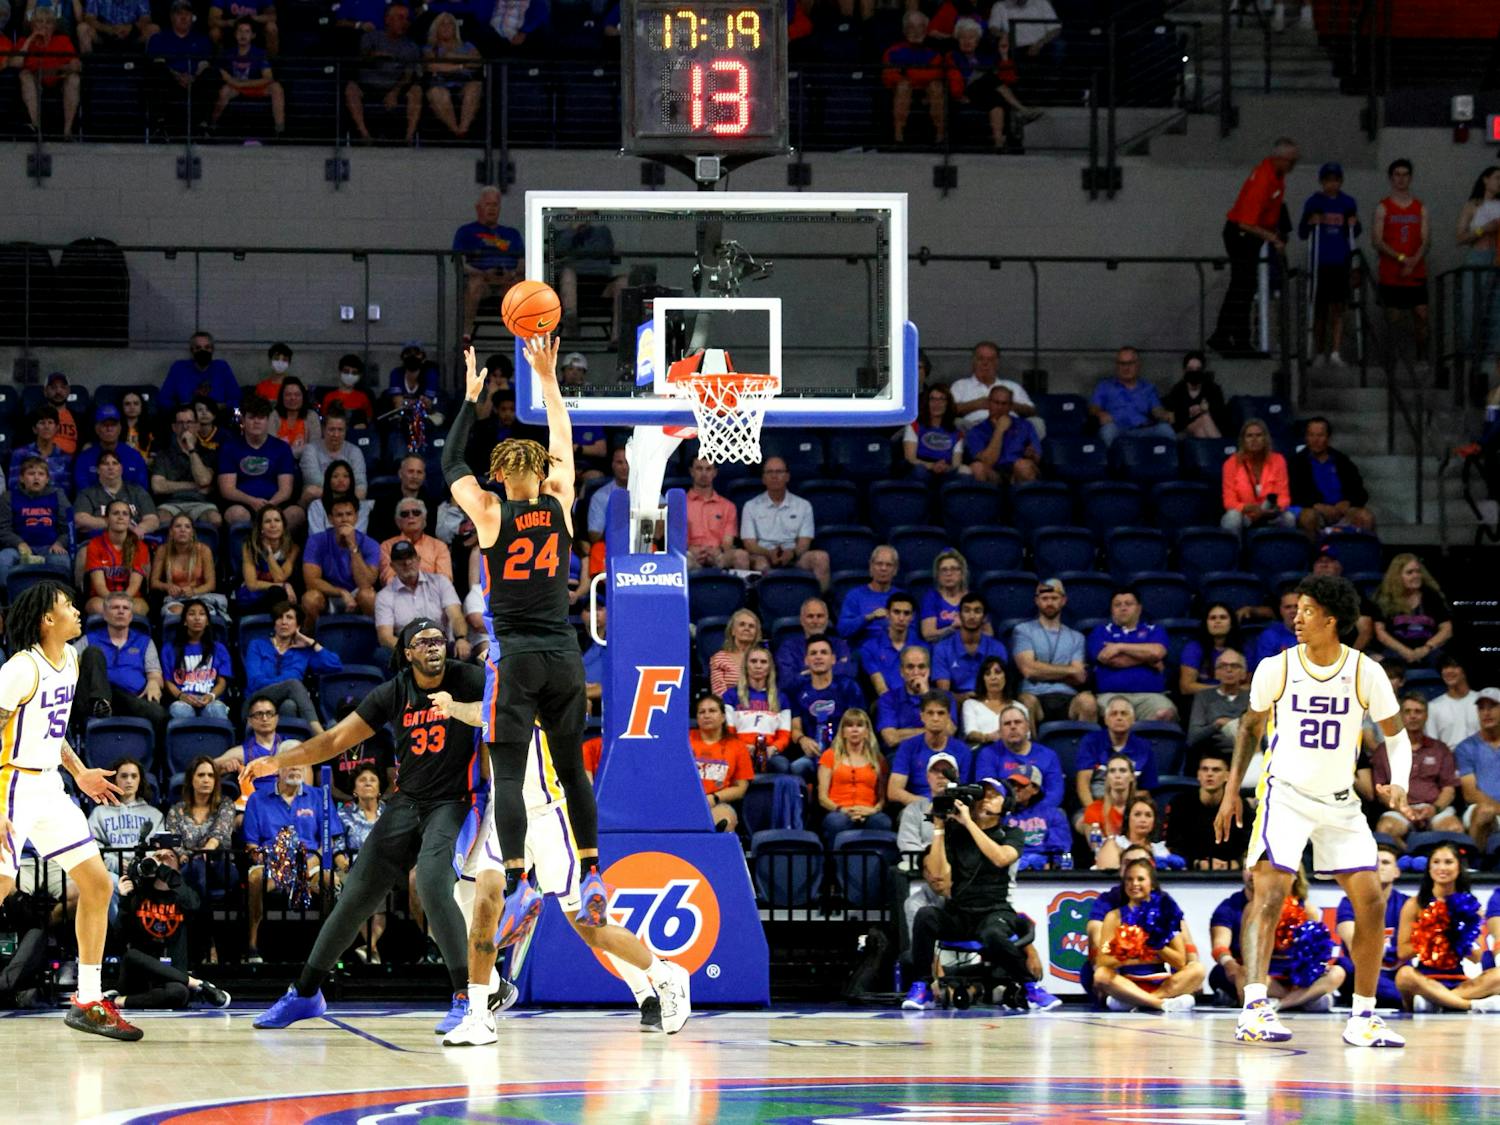 Florida guard Riley Kugel takes a jump shot in the Gators' 79-67 win against the Louisiana State Tigers Saturday, March 4, 2023. Kugel finished the game with a team-high 21 points.